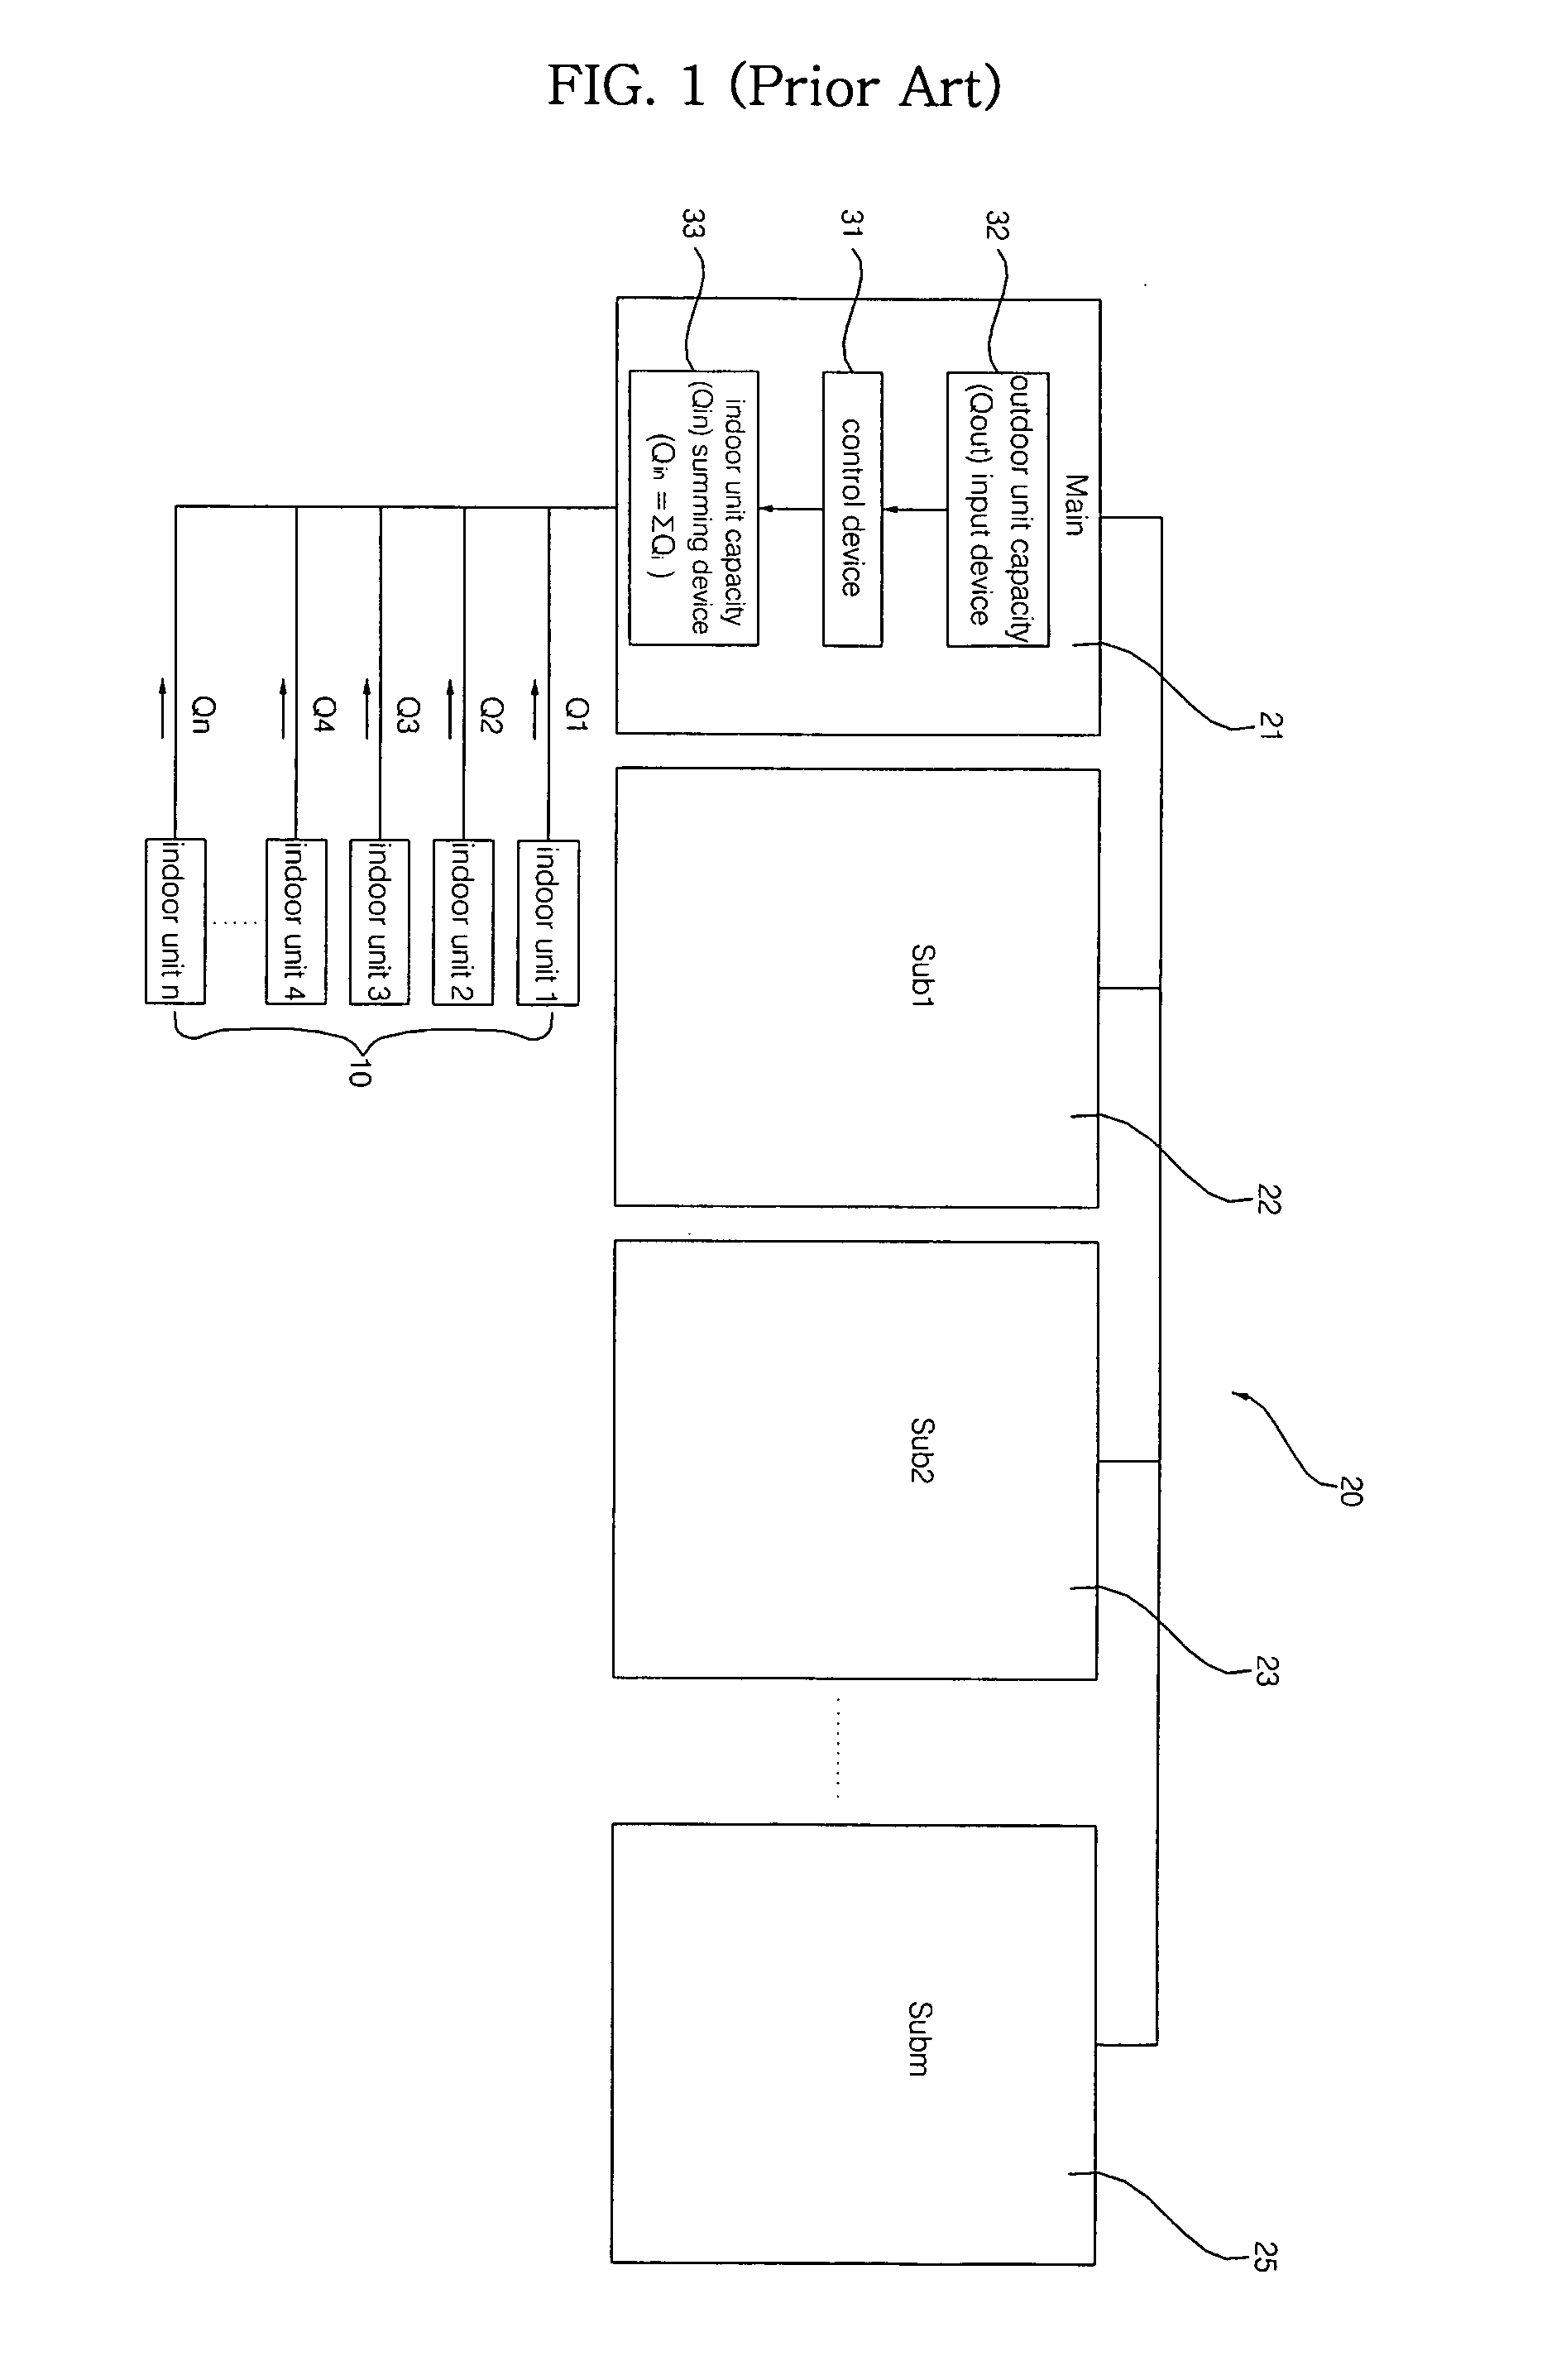 Apparatus and method of summing capacities of outdoor units in multiple air conditioner